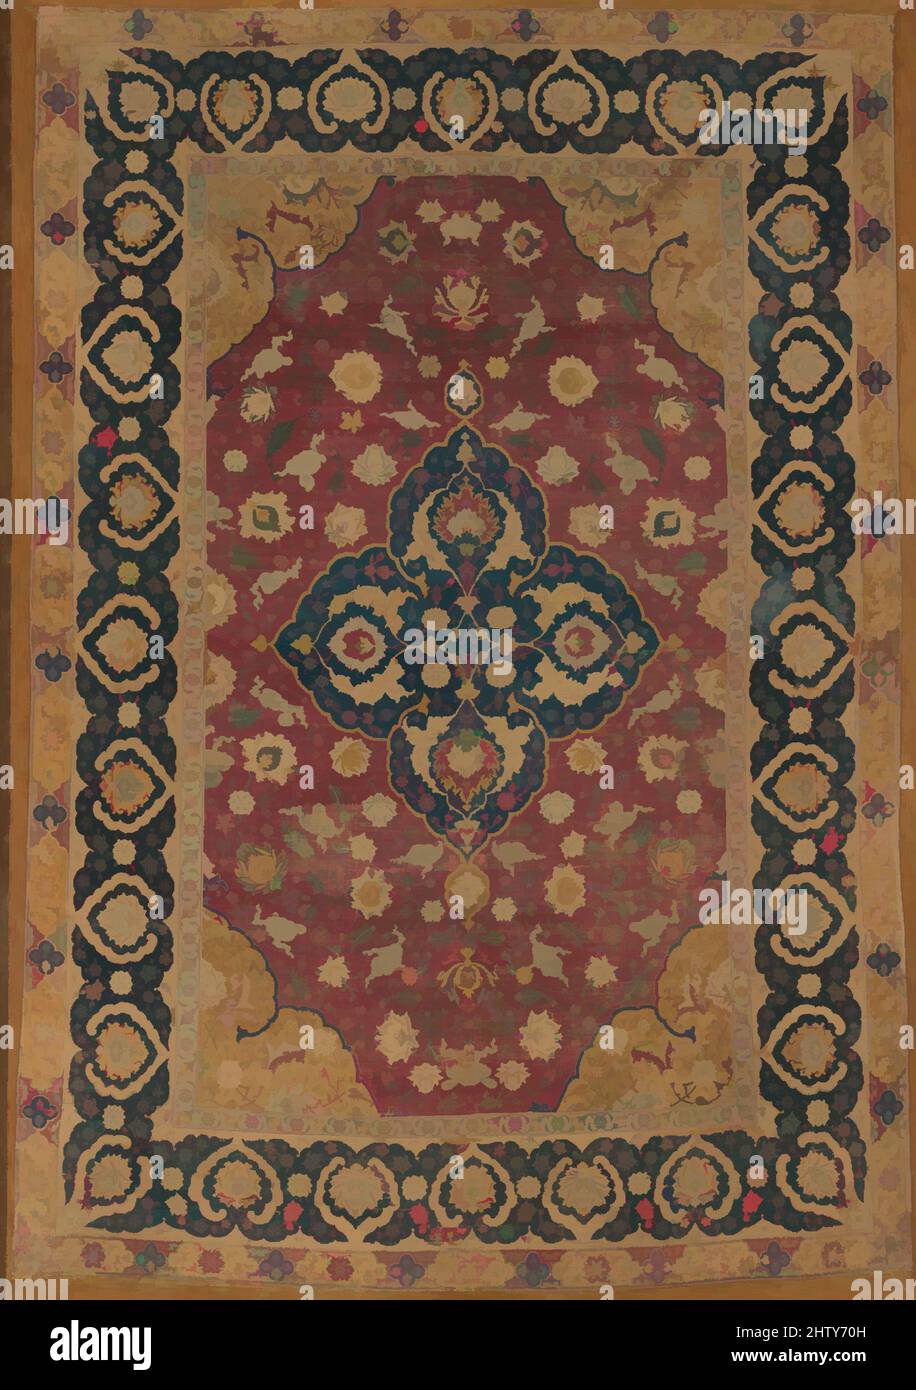 Art inspired by Silk Kashan Carpet, second half 16th century, Made in Iran, probably Kashan, Silk (warp, weft, and pile), metal wrapped thread; asymmetrically knotted pile, Mount Dimensions: L. 105 1/2 in. (268 cm), Textiles-Rugs, This carpet, possibly woven in the silk trade and, Classic works modernized by Artotop with a splash of modernity. Shapes, color and value, eye-catching visual impact on art. Emotions through freedom of artworks in a contemporary way. A timeless message pursuing a wildly creative new direction. Artists turning to the digital medium and creating the Artotop NFT Stock Photo